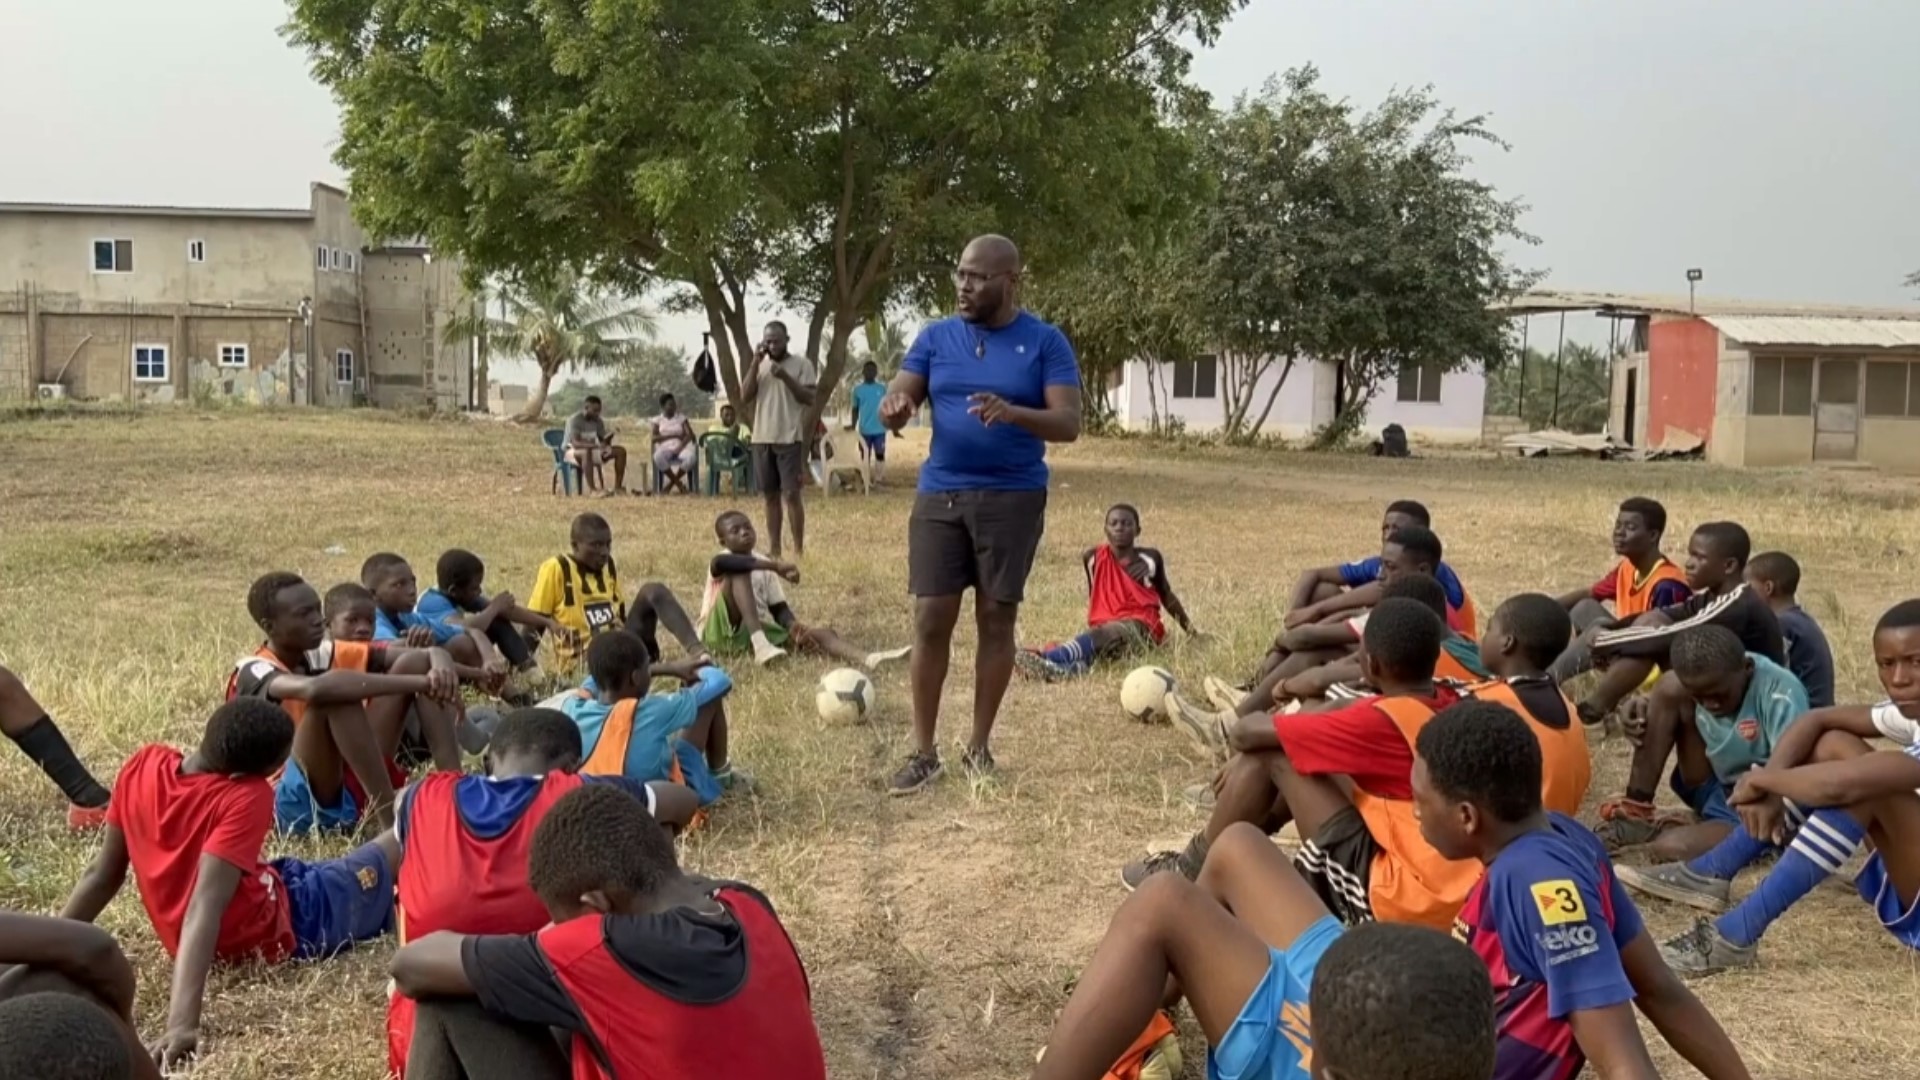 After learning that his family is from Ghana, Army veteran Mishaw Cuyler built a playground for kids at their orphanage in Ghana.